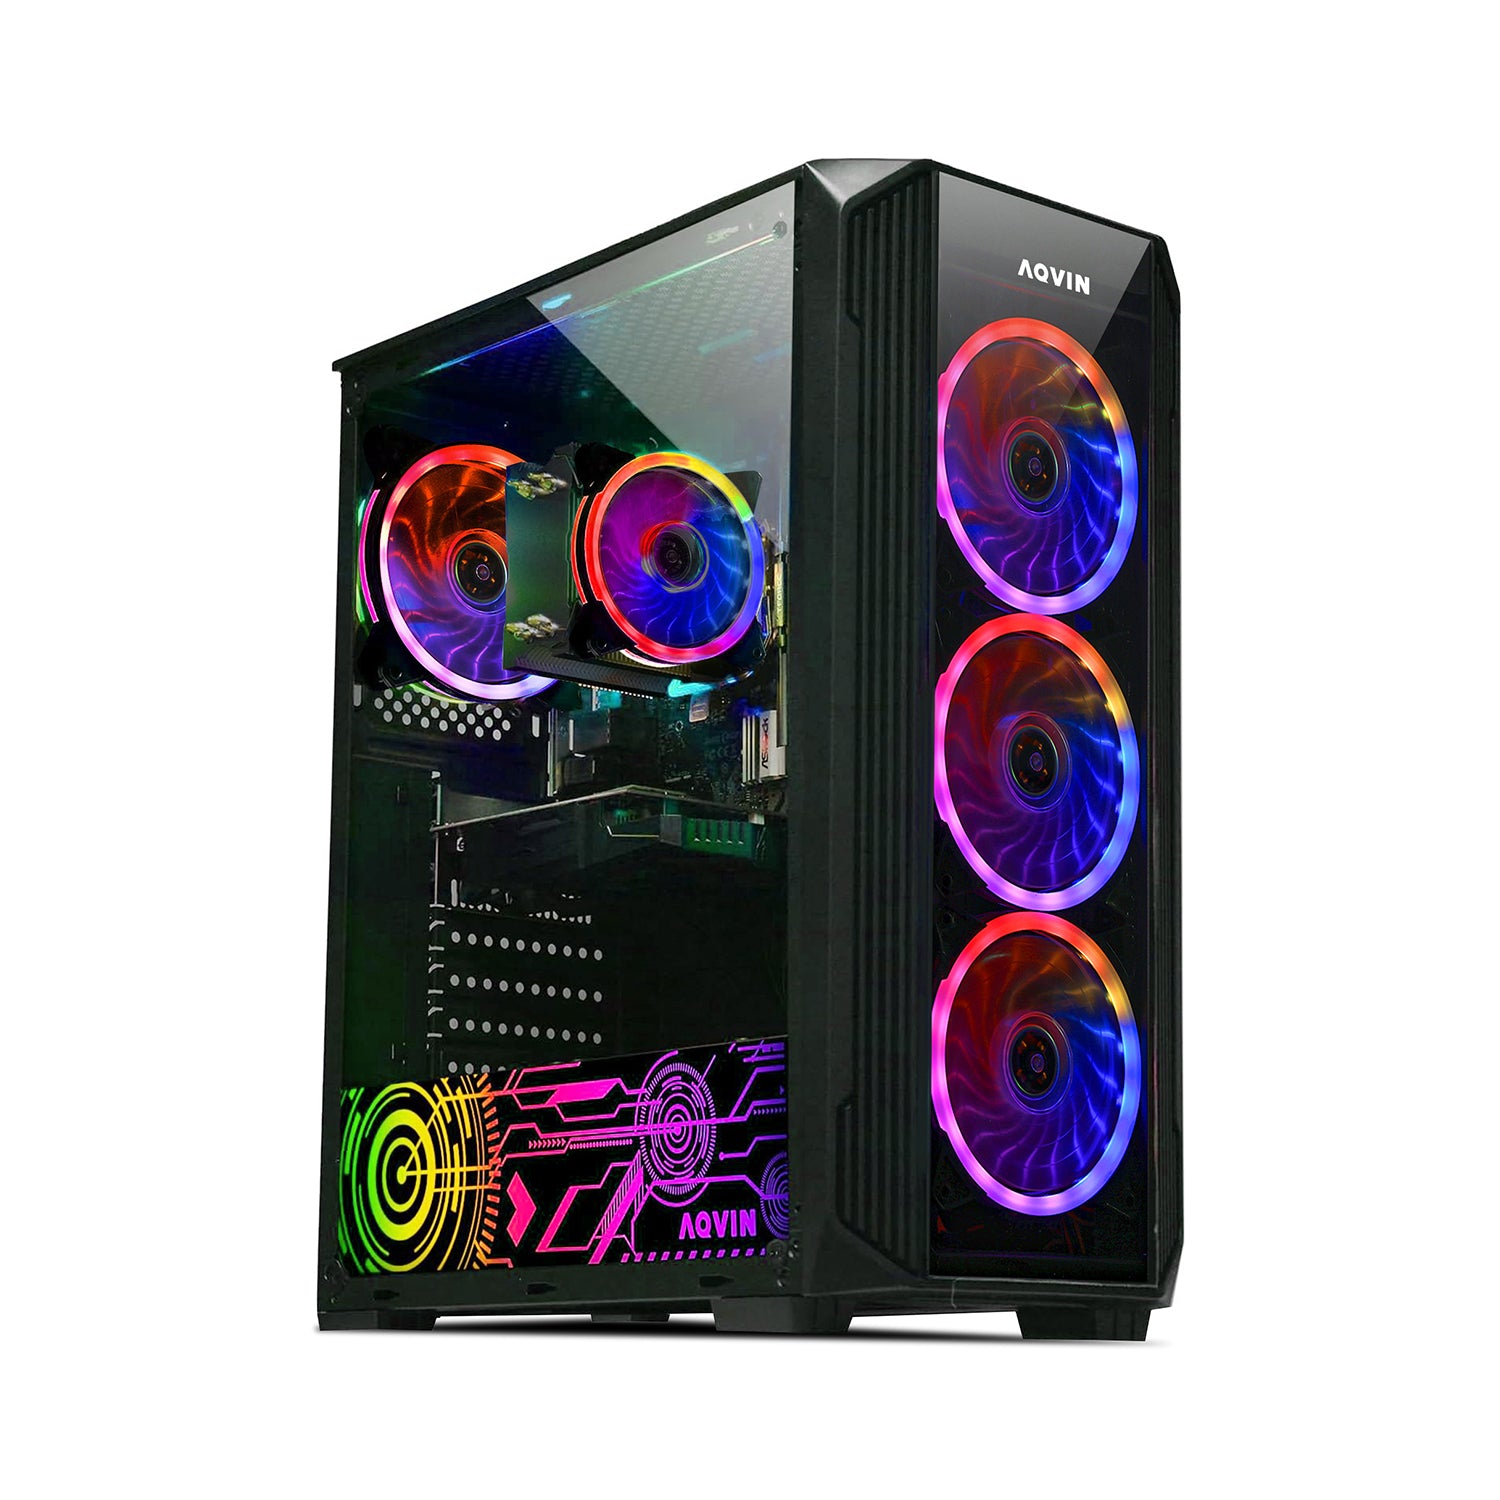 AQVIN Z-Force Gaming Desktop Tower Computer - RGB (Intel Core i3 @3.60 GHz/ 1TB SSD (fast boot)/ 32GB DDR4 RAM/ GeForce RTX 3060-4060/ Windows 11 Pro/ Gaming Keyboard and Mouse) WIFI